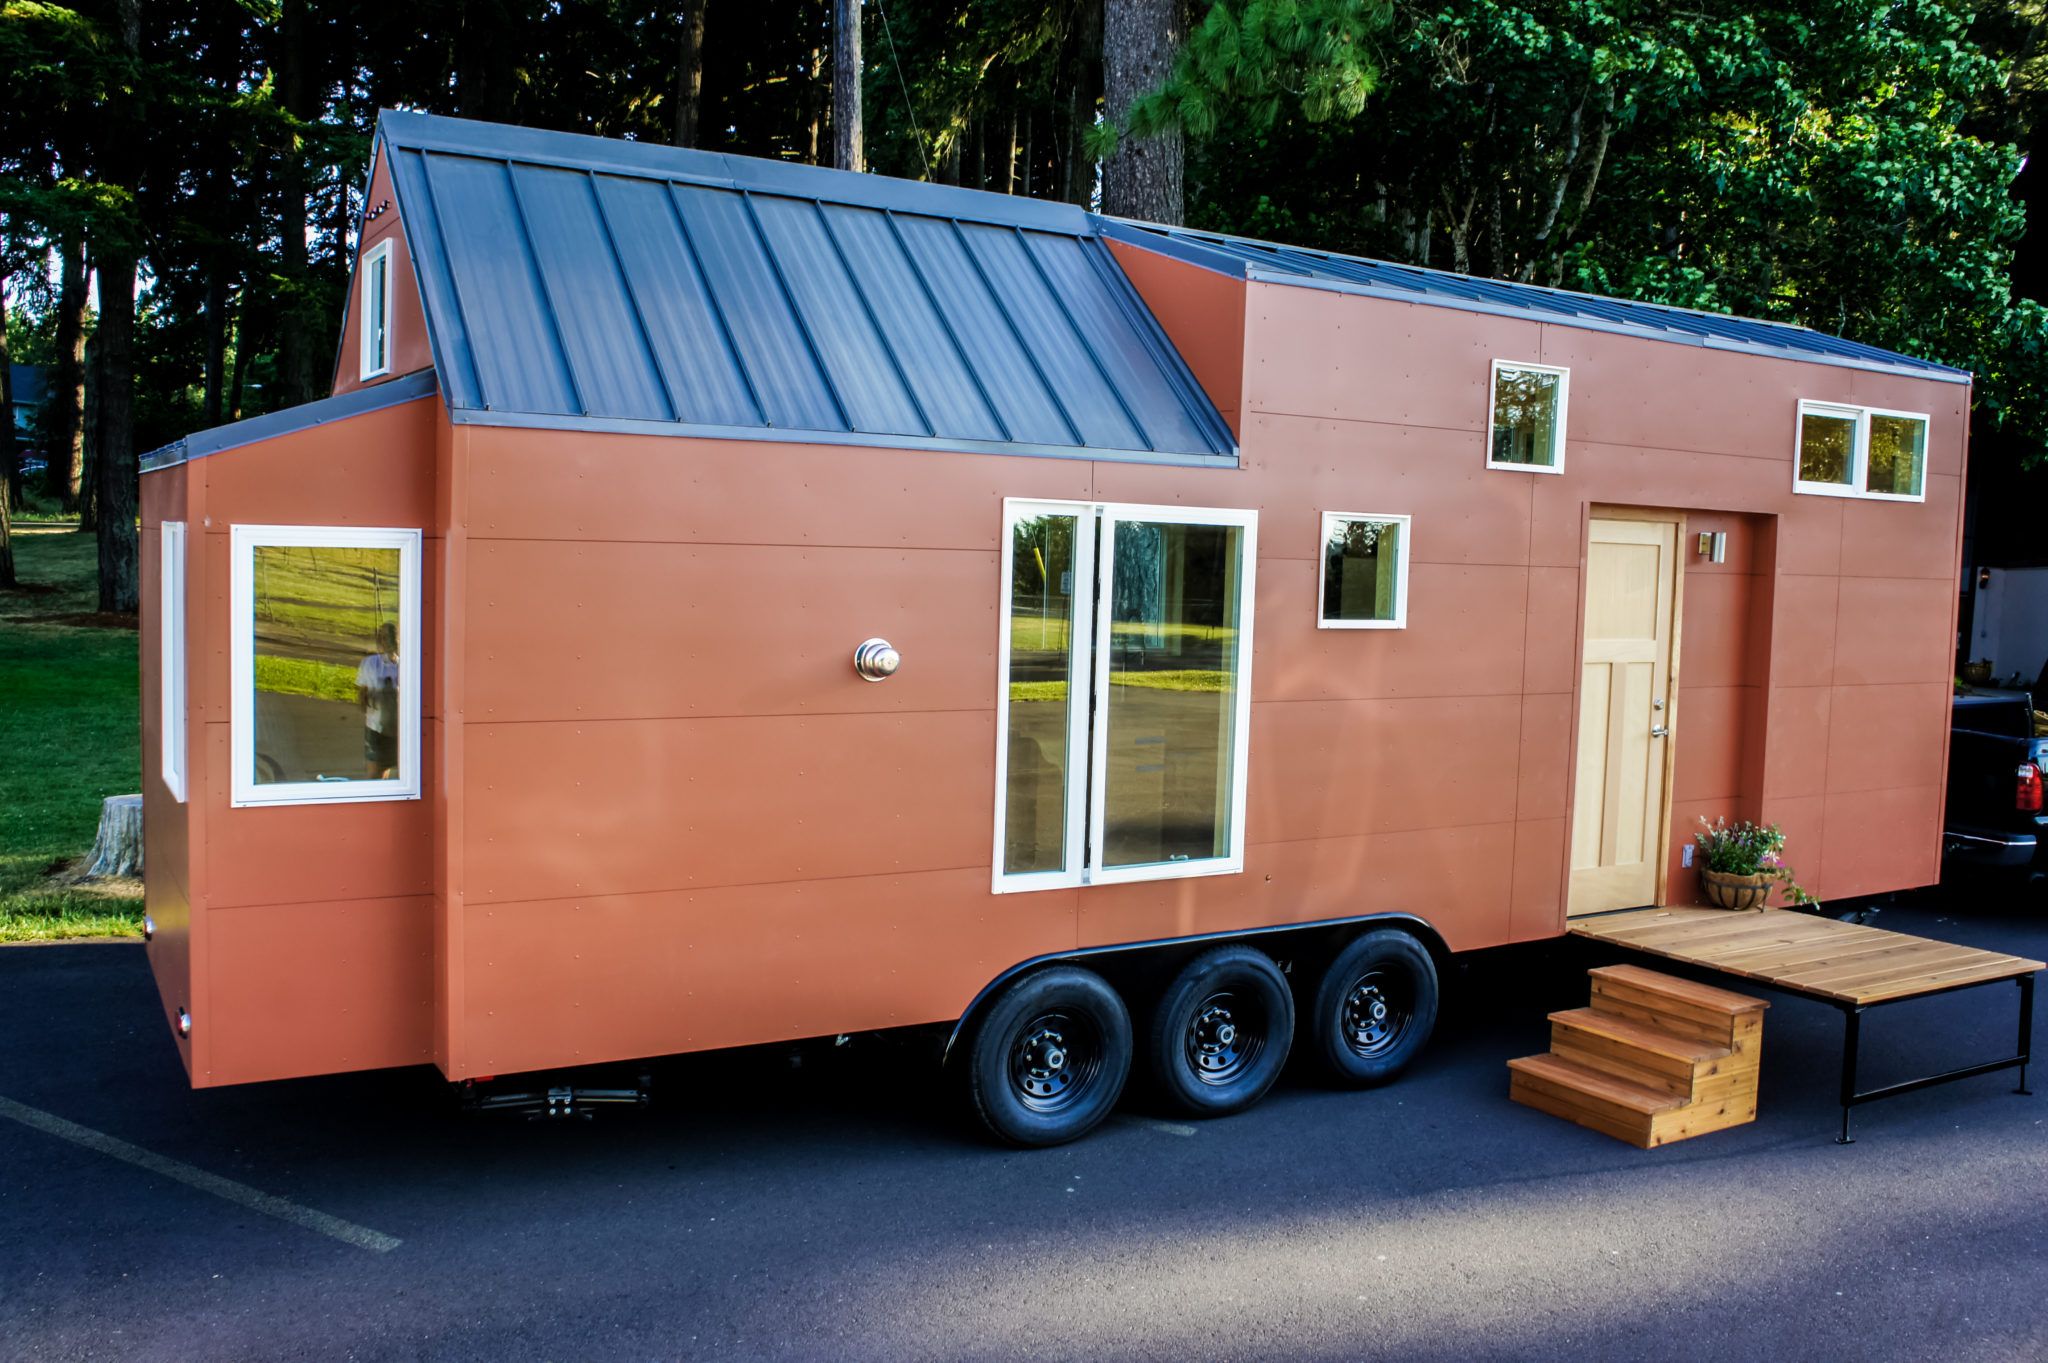 This Orange Tiny House Is Only 400ft2 , but Check Out This Amazing Interior